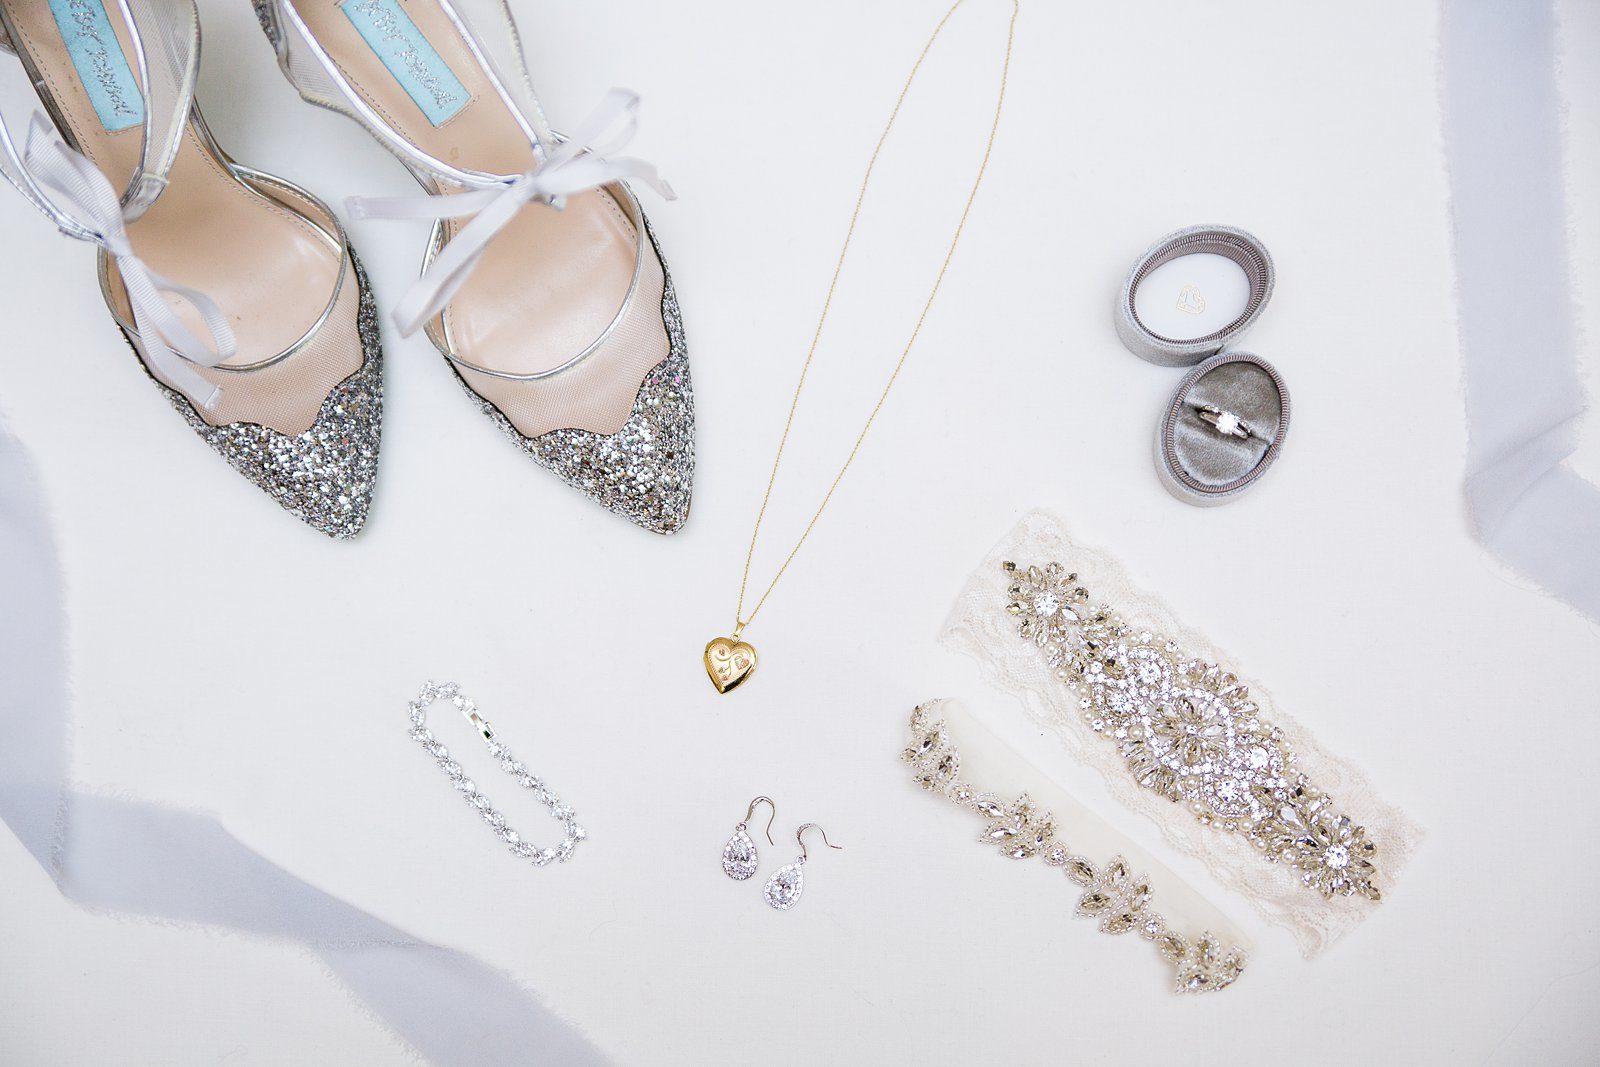 Brides silver and white gold wedding day details by PMA Photography.